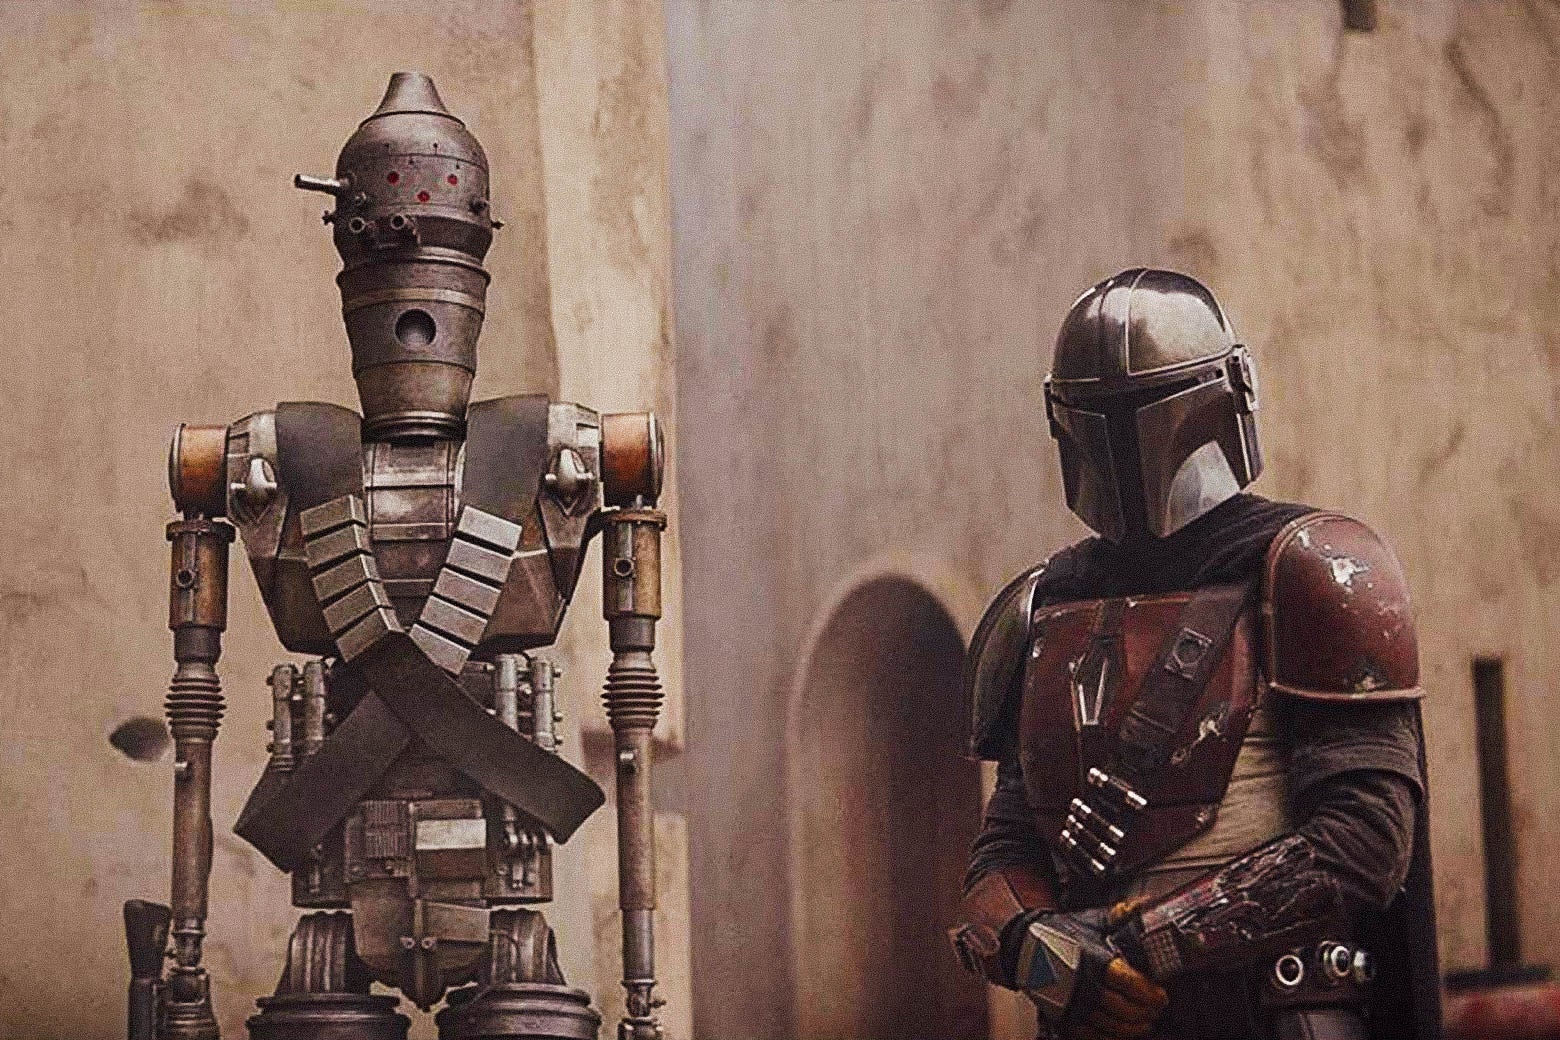 IG-11, a droid voiced by Taika Waititi, and Pascal as the Mandalorian.